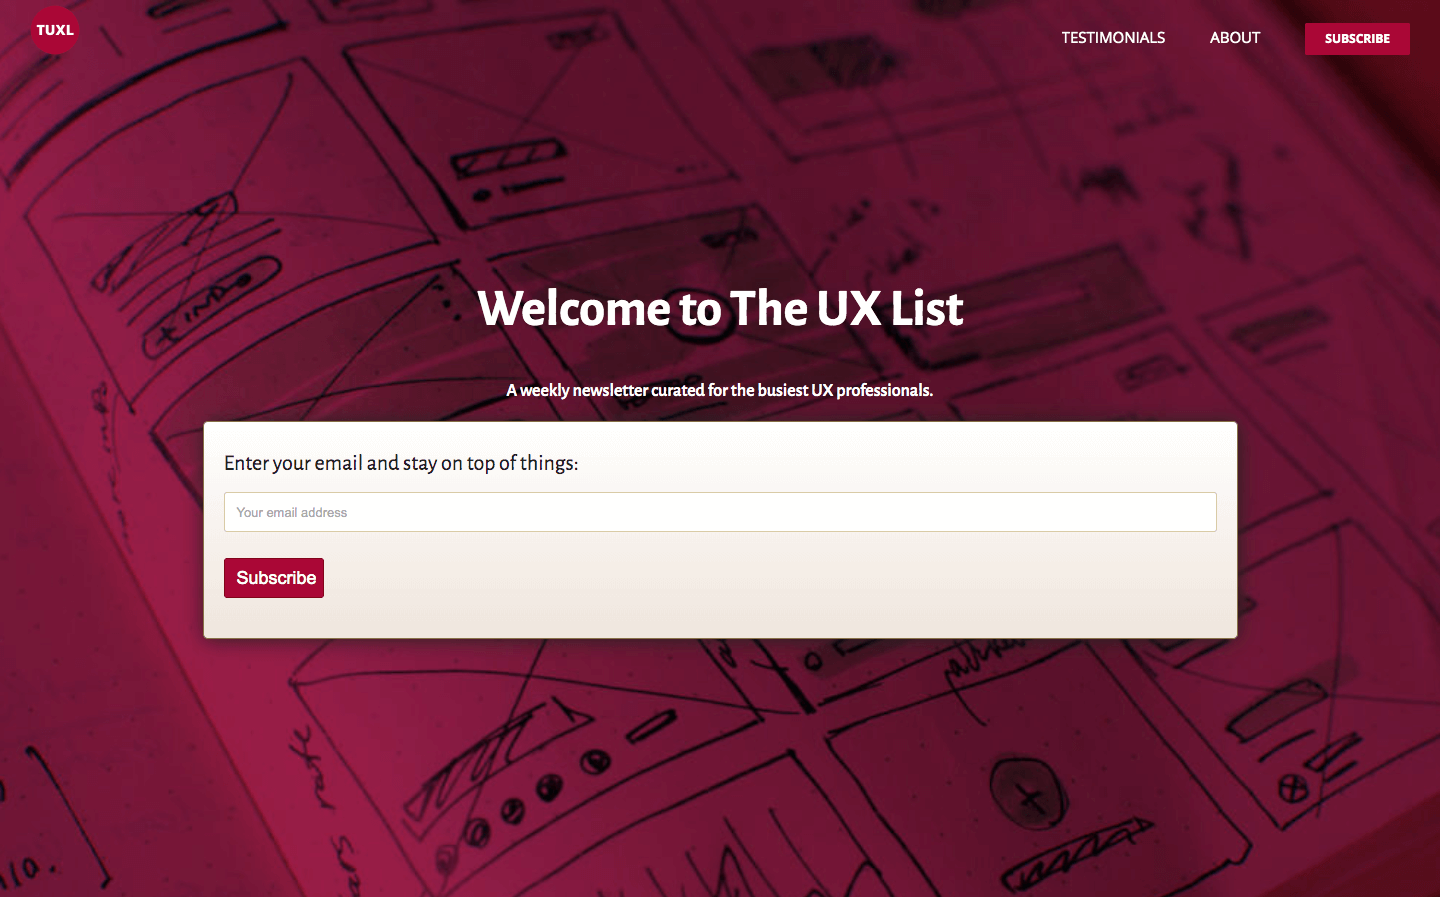 The UX List homepage